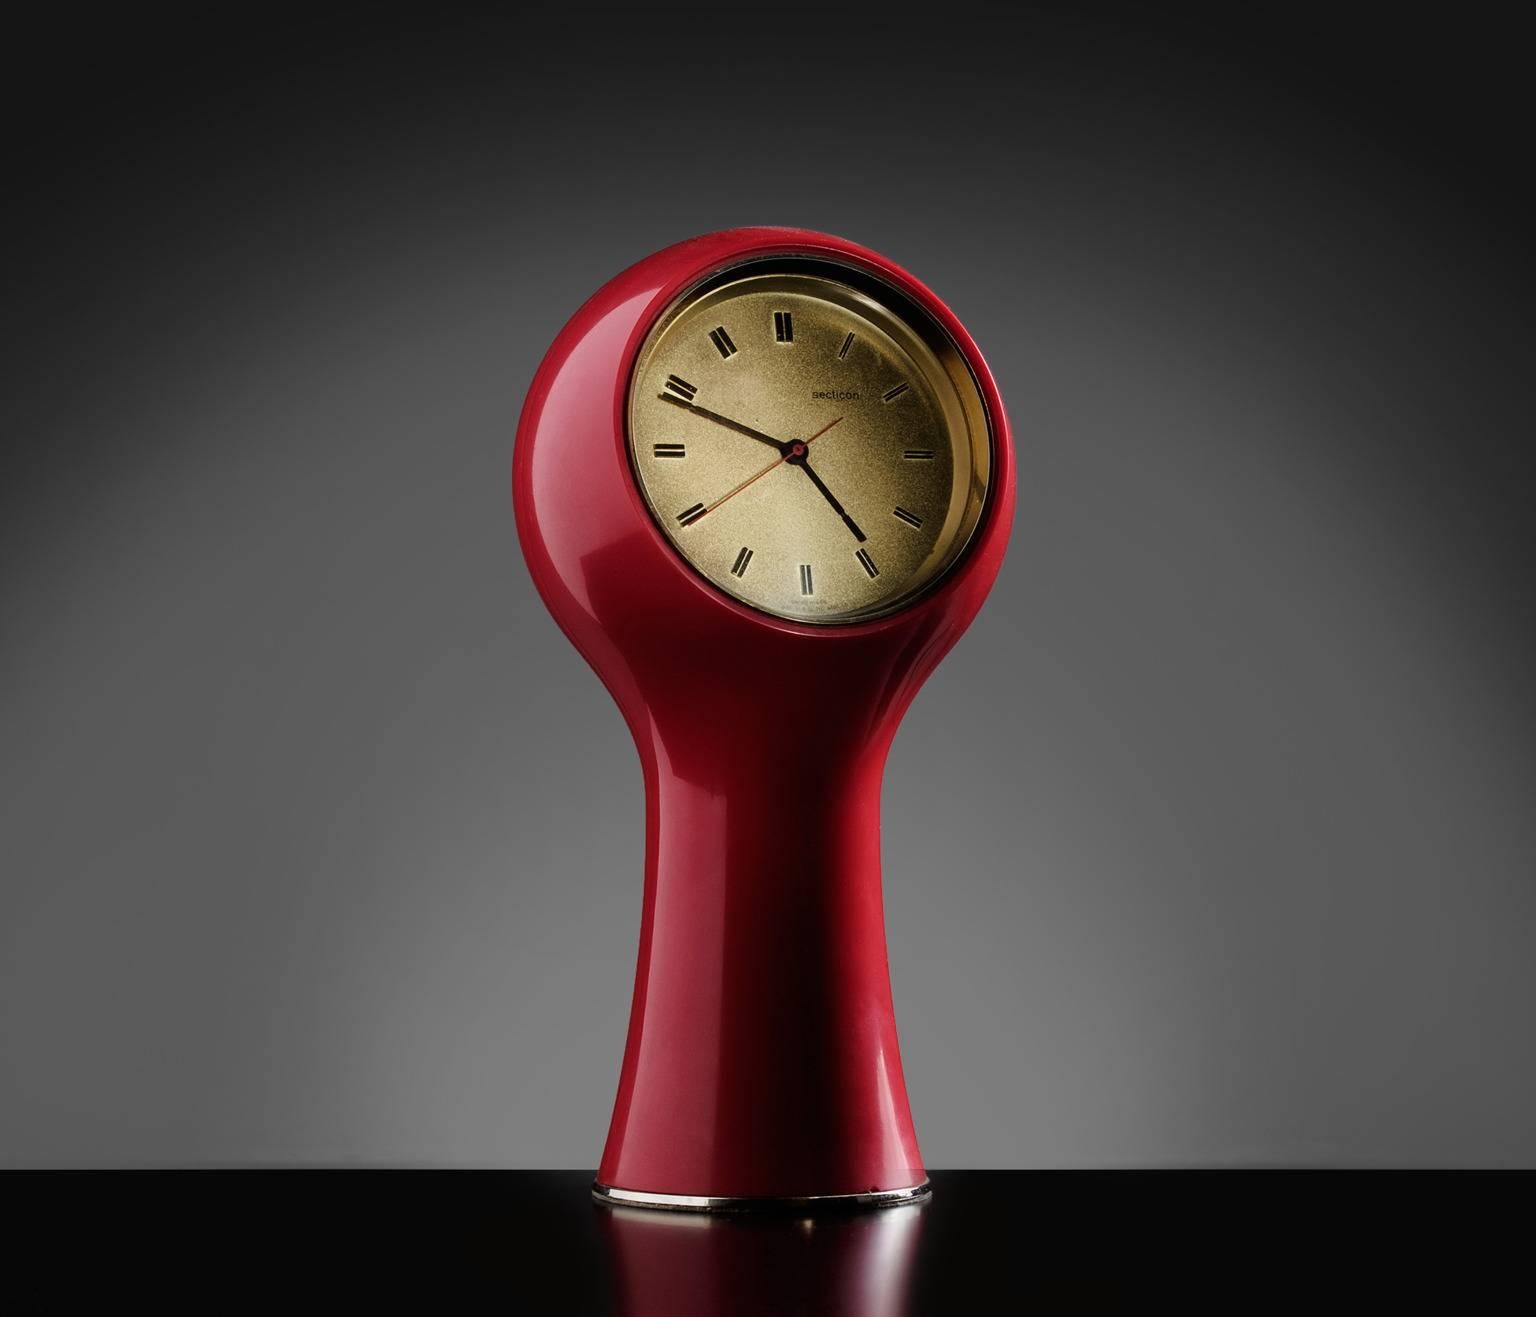 Clock, in metal and plastic, by Angelo Mangiarotti, Italy 1960s. 

Swiss made bright red table clock designed by Angelo Mangiarotti in the 1960s. This 'Space Age' era clock is detailed with brass details.

Angelo Mangiarotti, an Italian